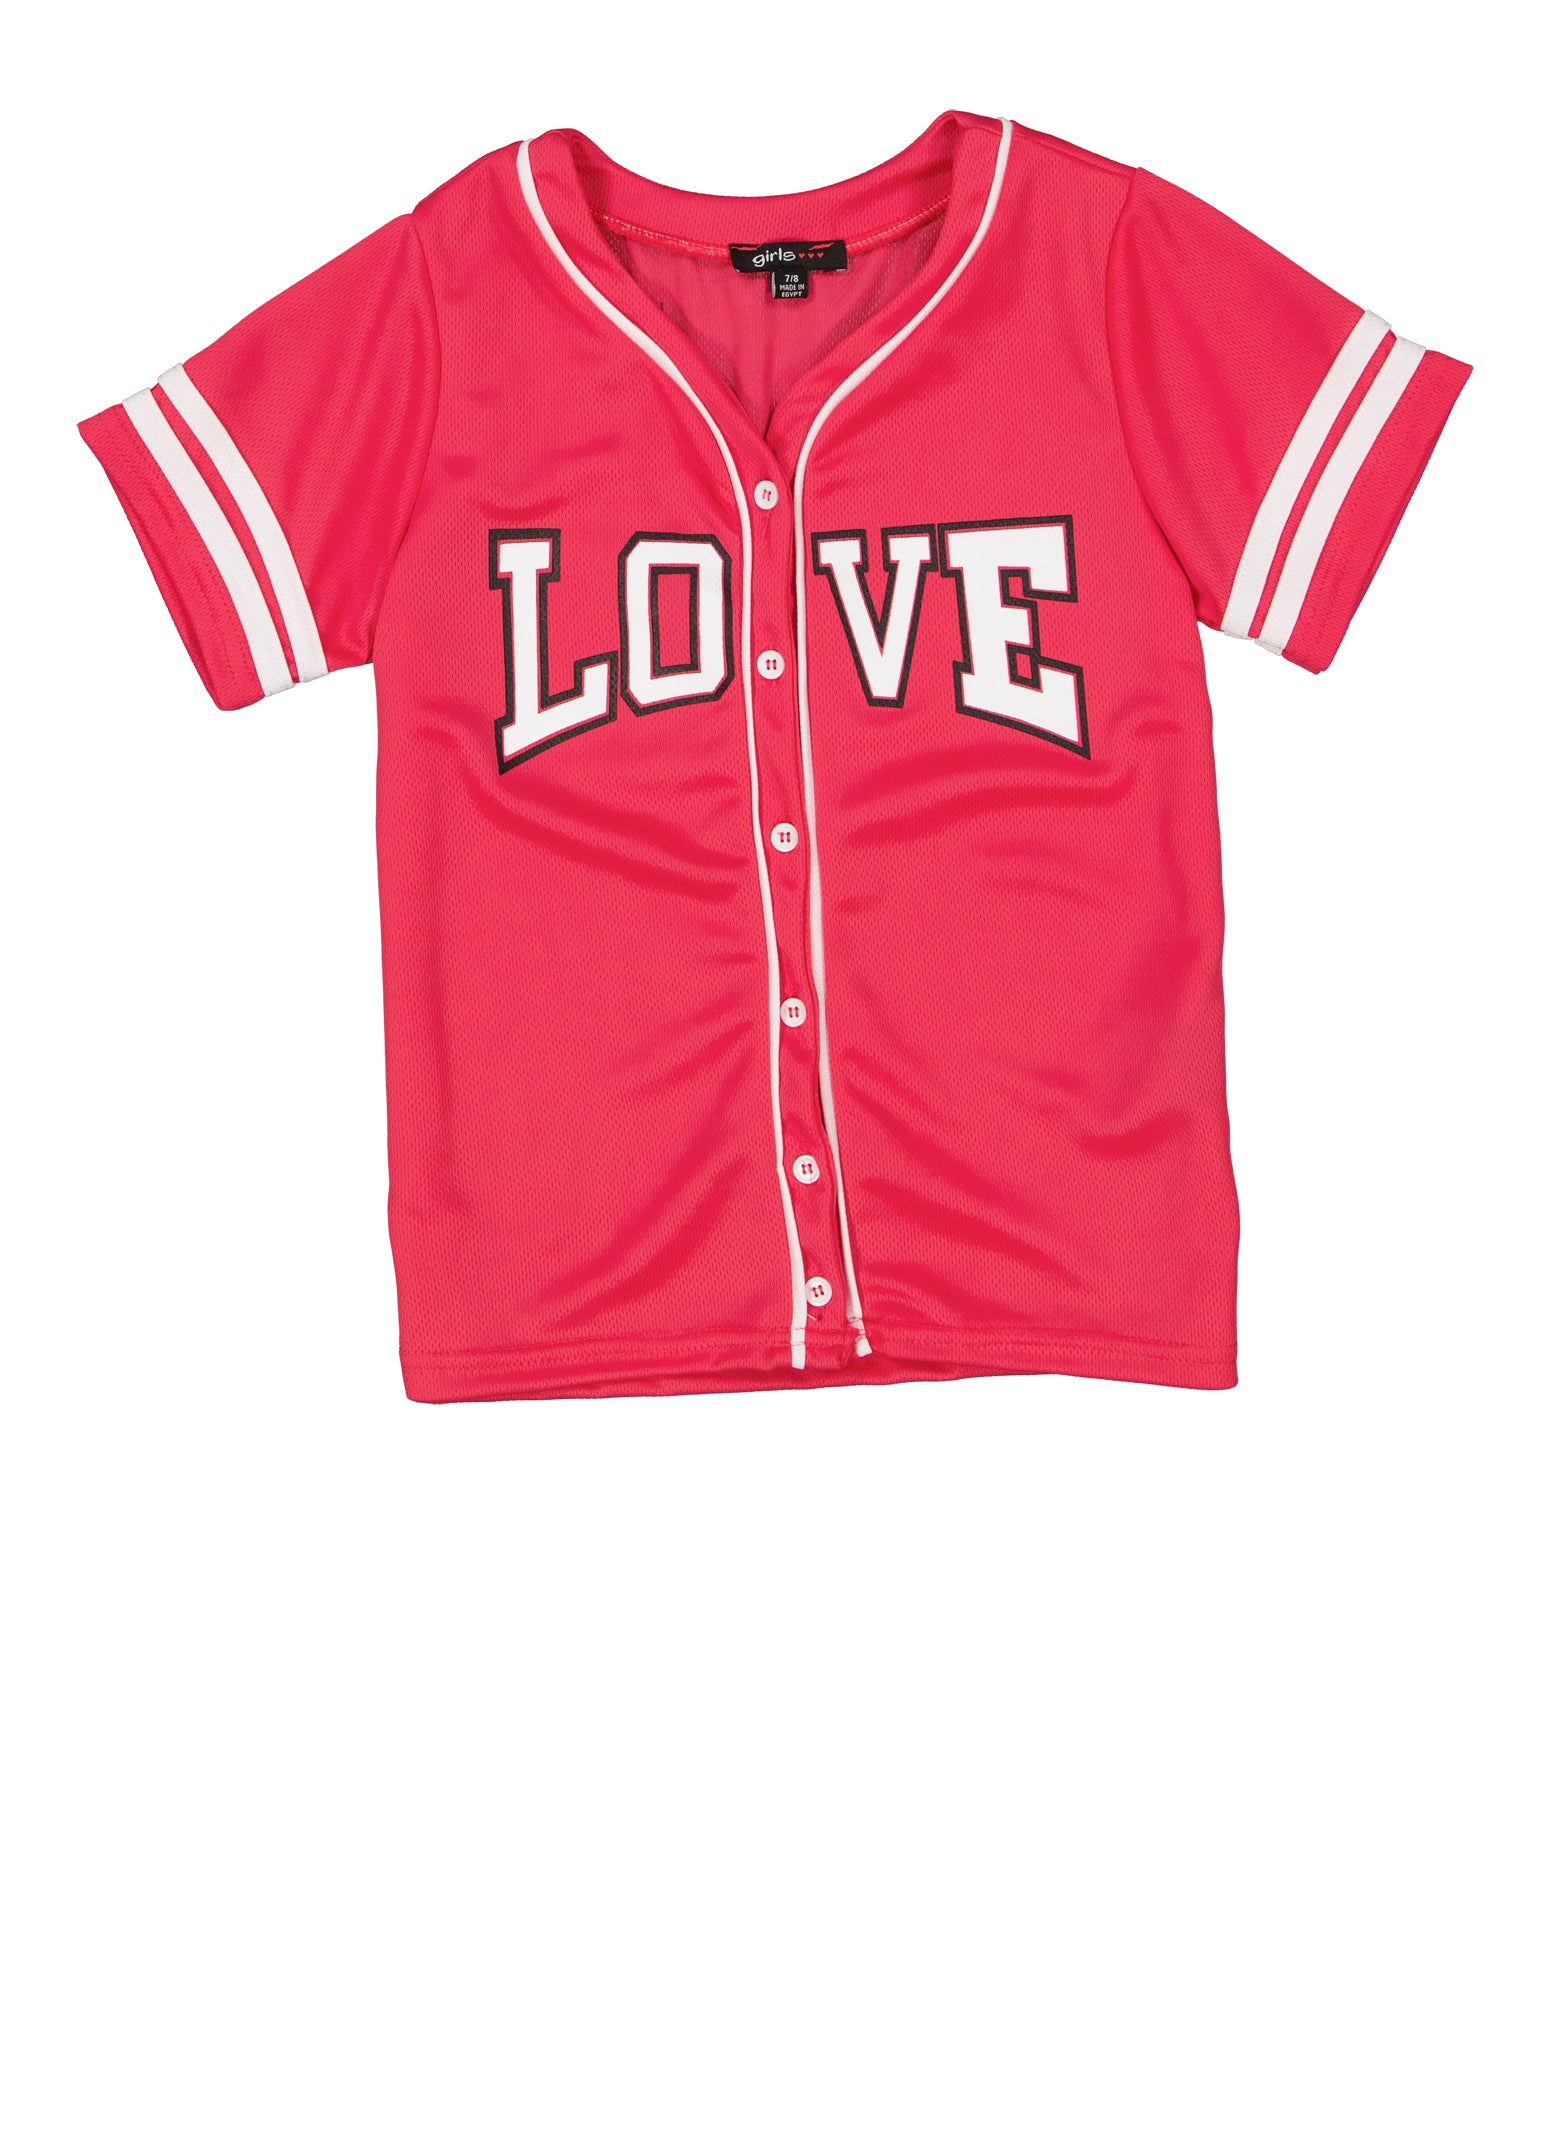 how to style a baseball jersey girl